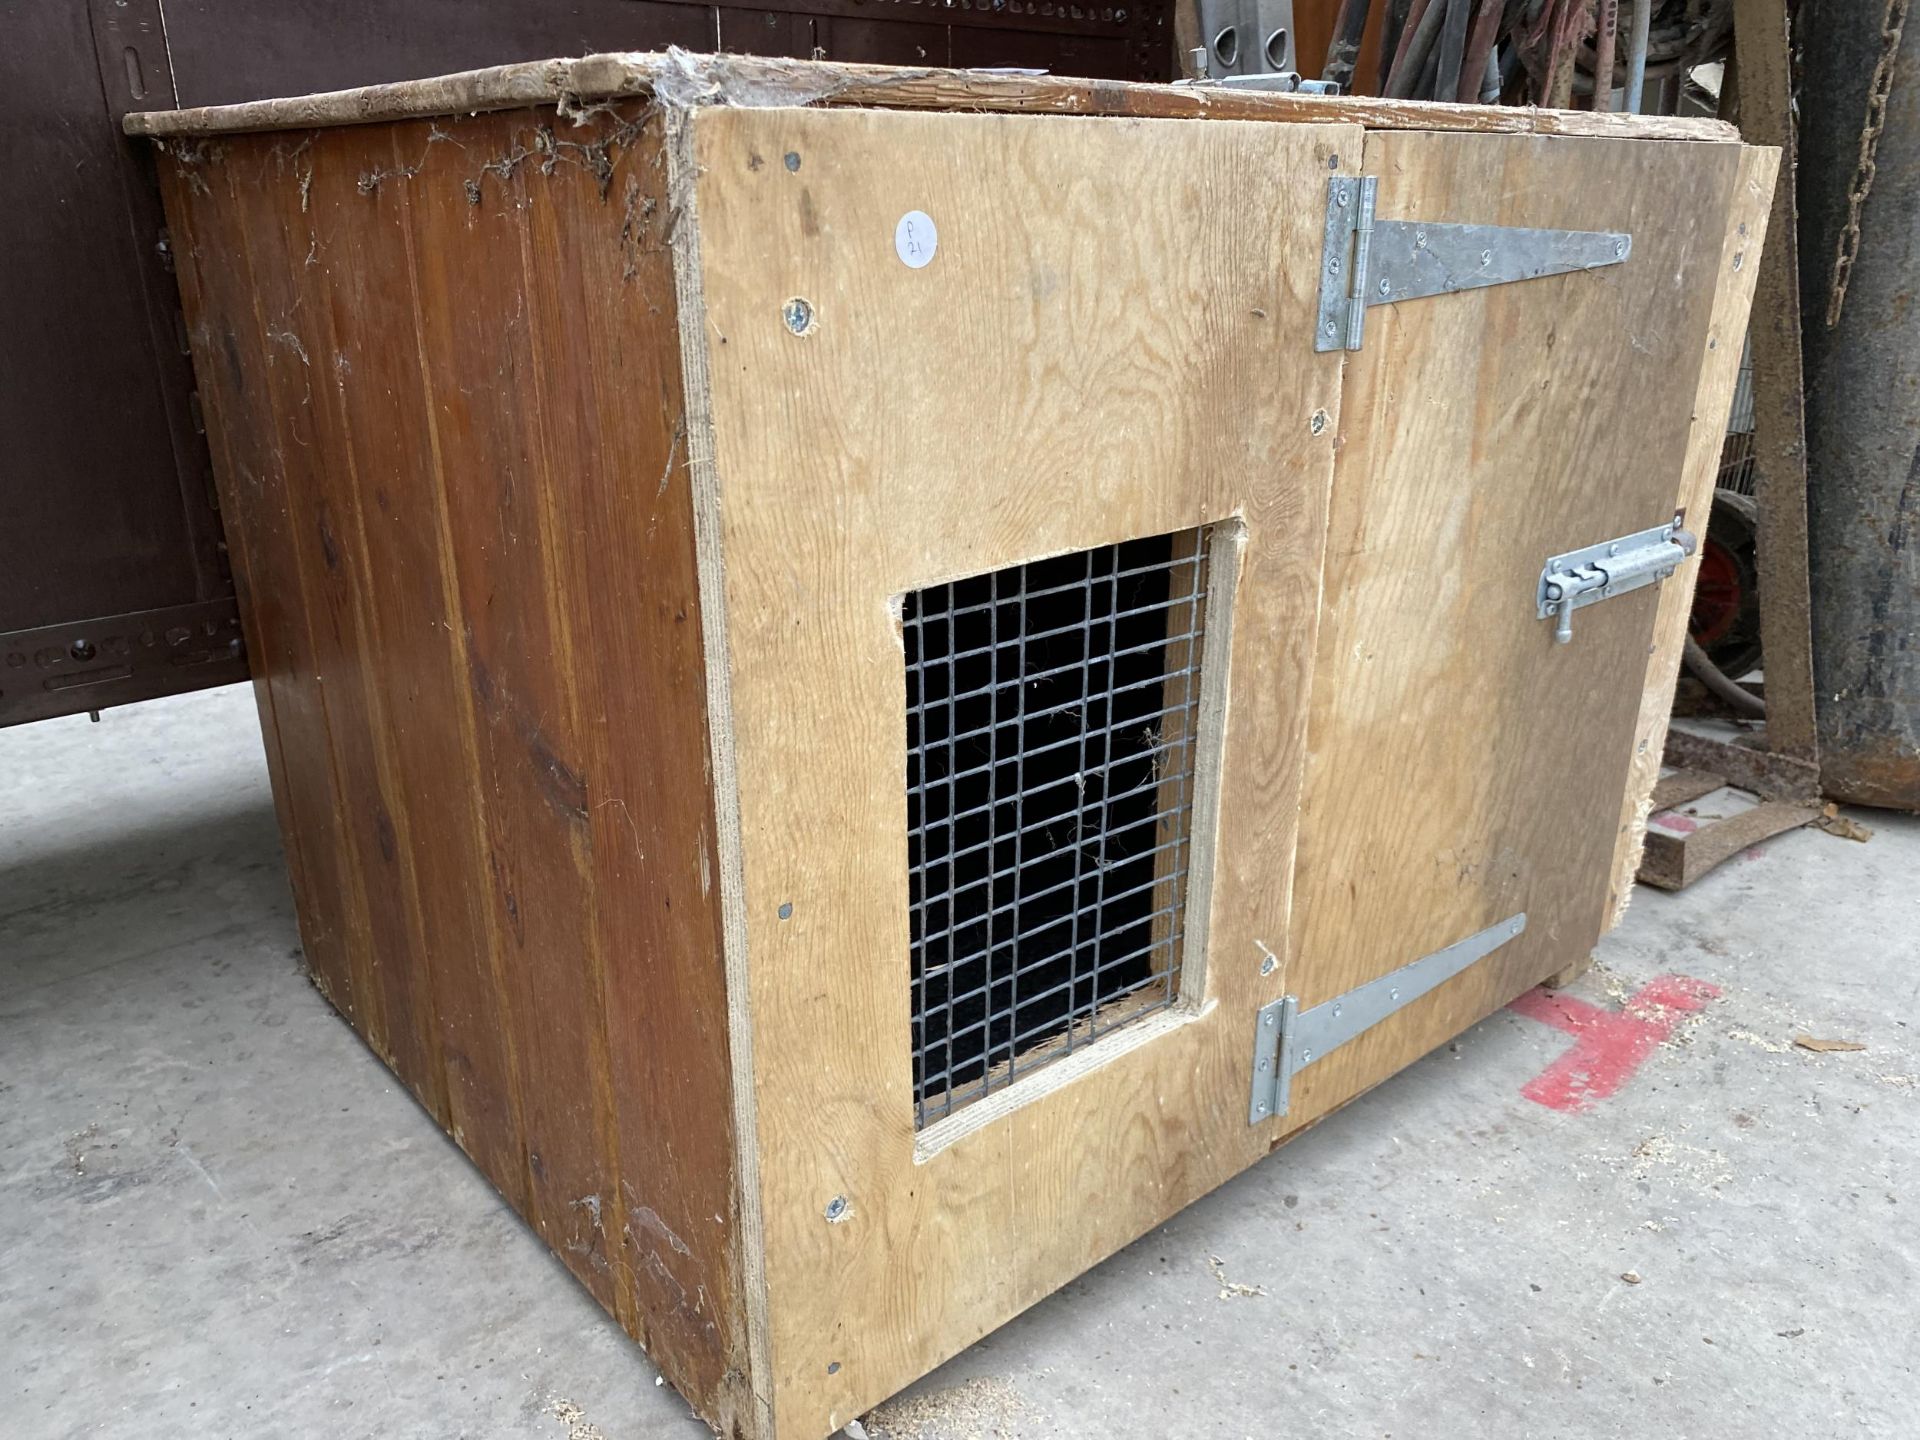 A WOODEN ANIMAL HUTCH - Image 2 of 4